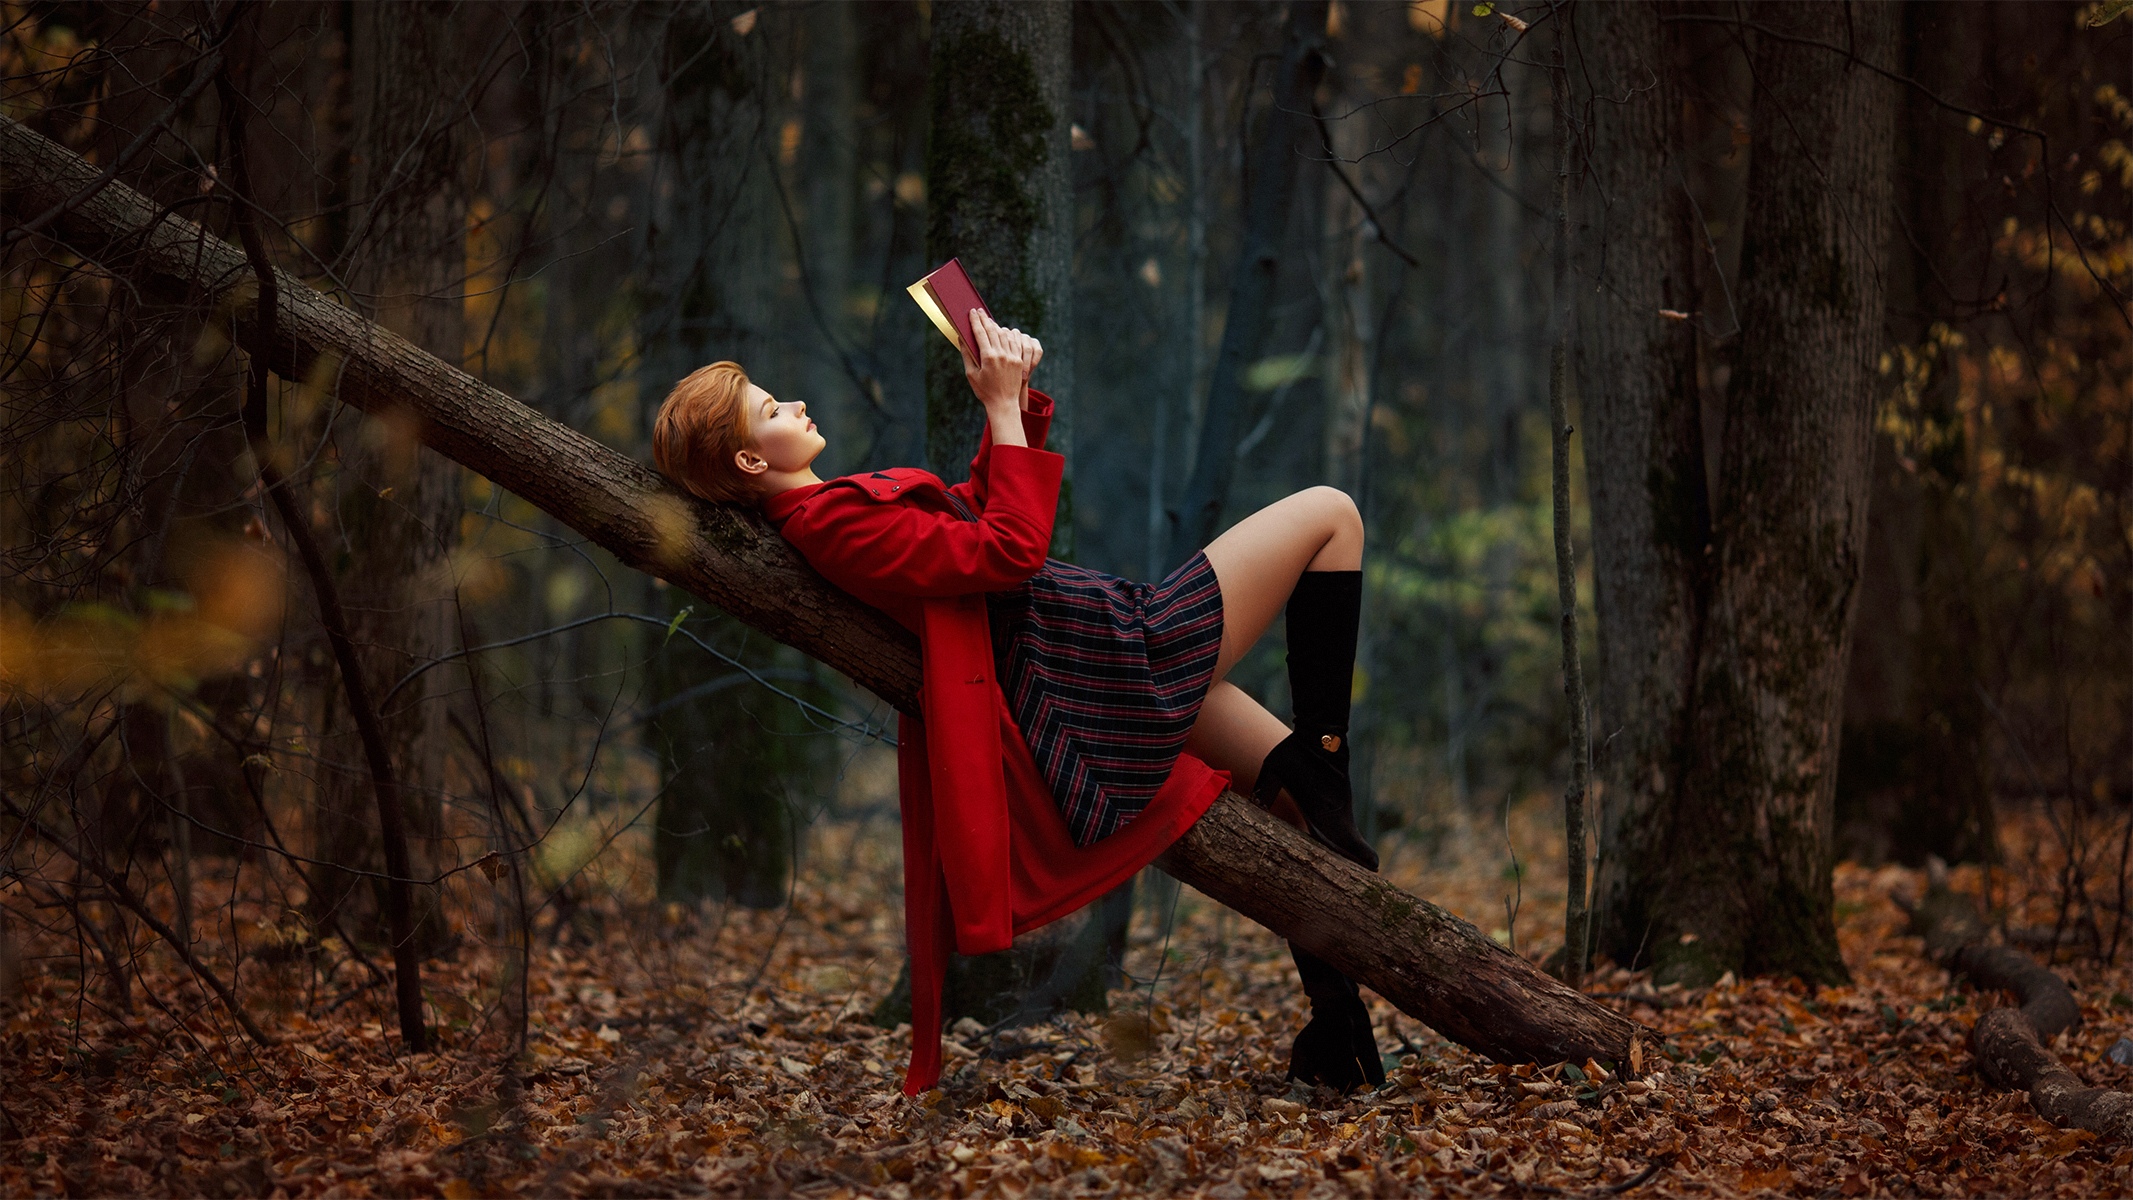 Anastasia Zhilina Women Model Redhead Profile Outdoors Forest Trees Log Coats Red Coat Dress Boots R 2133x1200